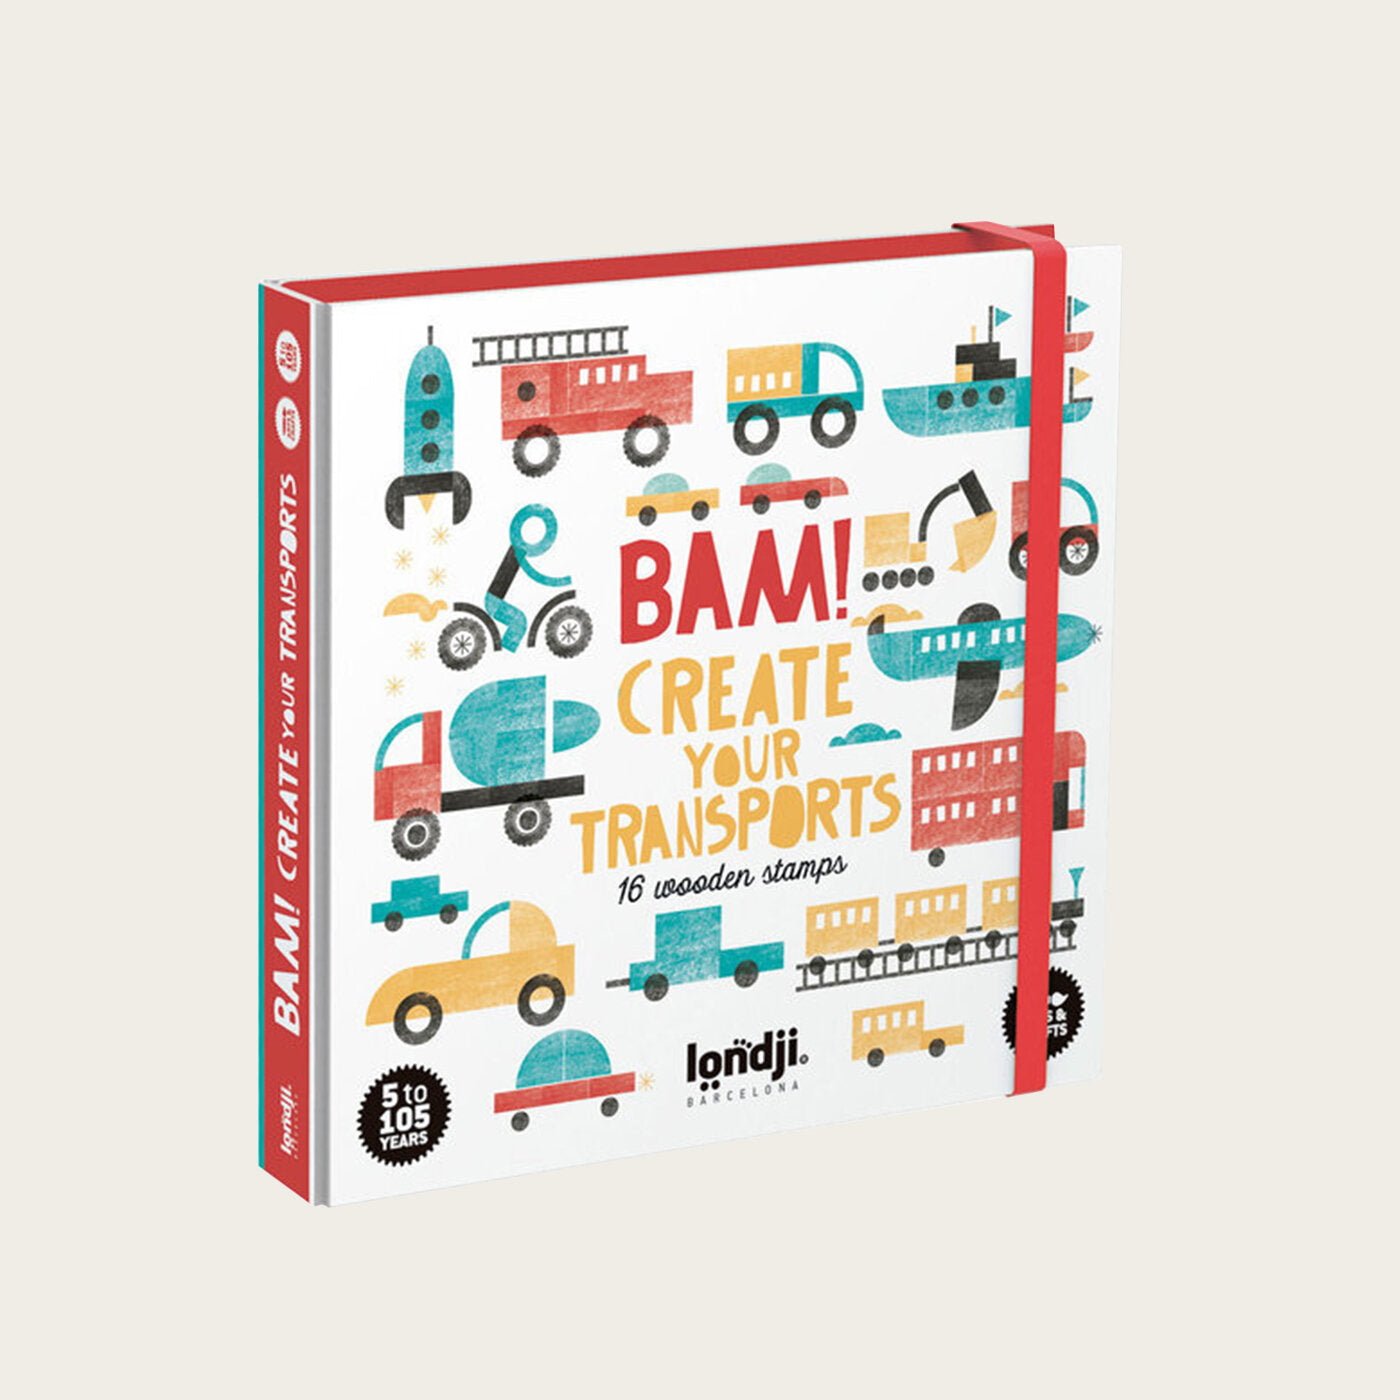 Bam! Create Your Transports!l